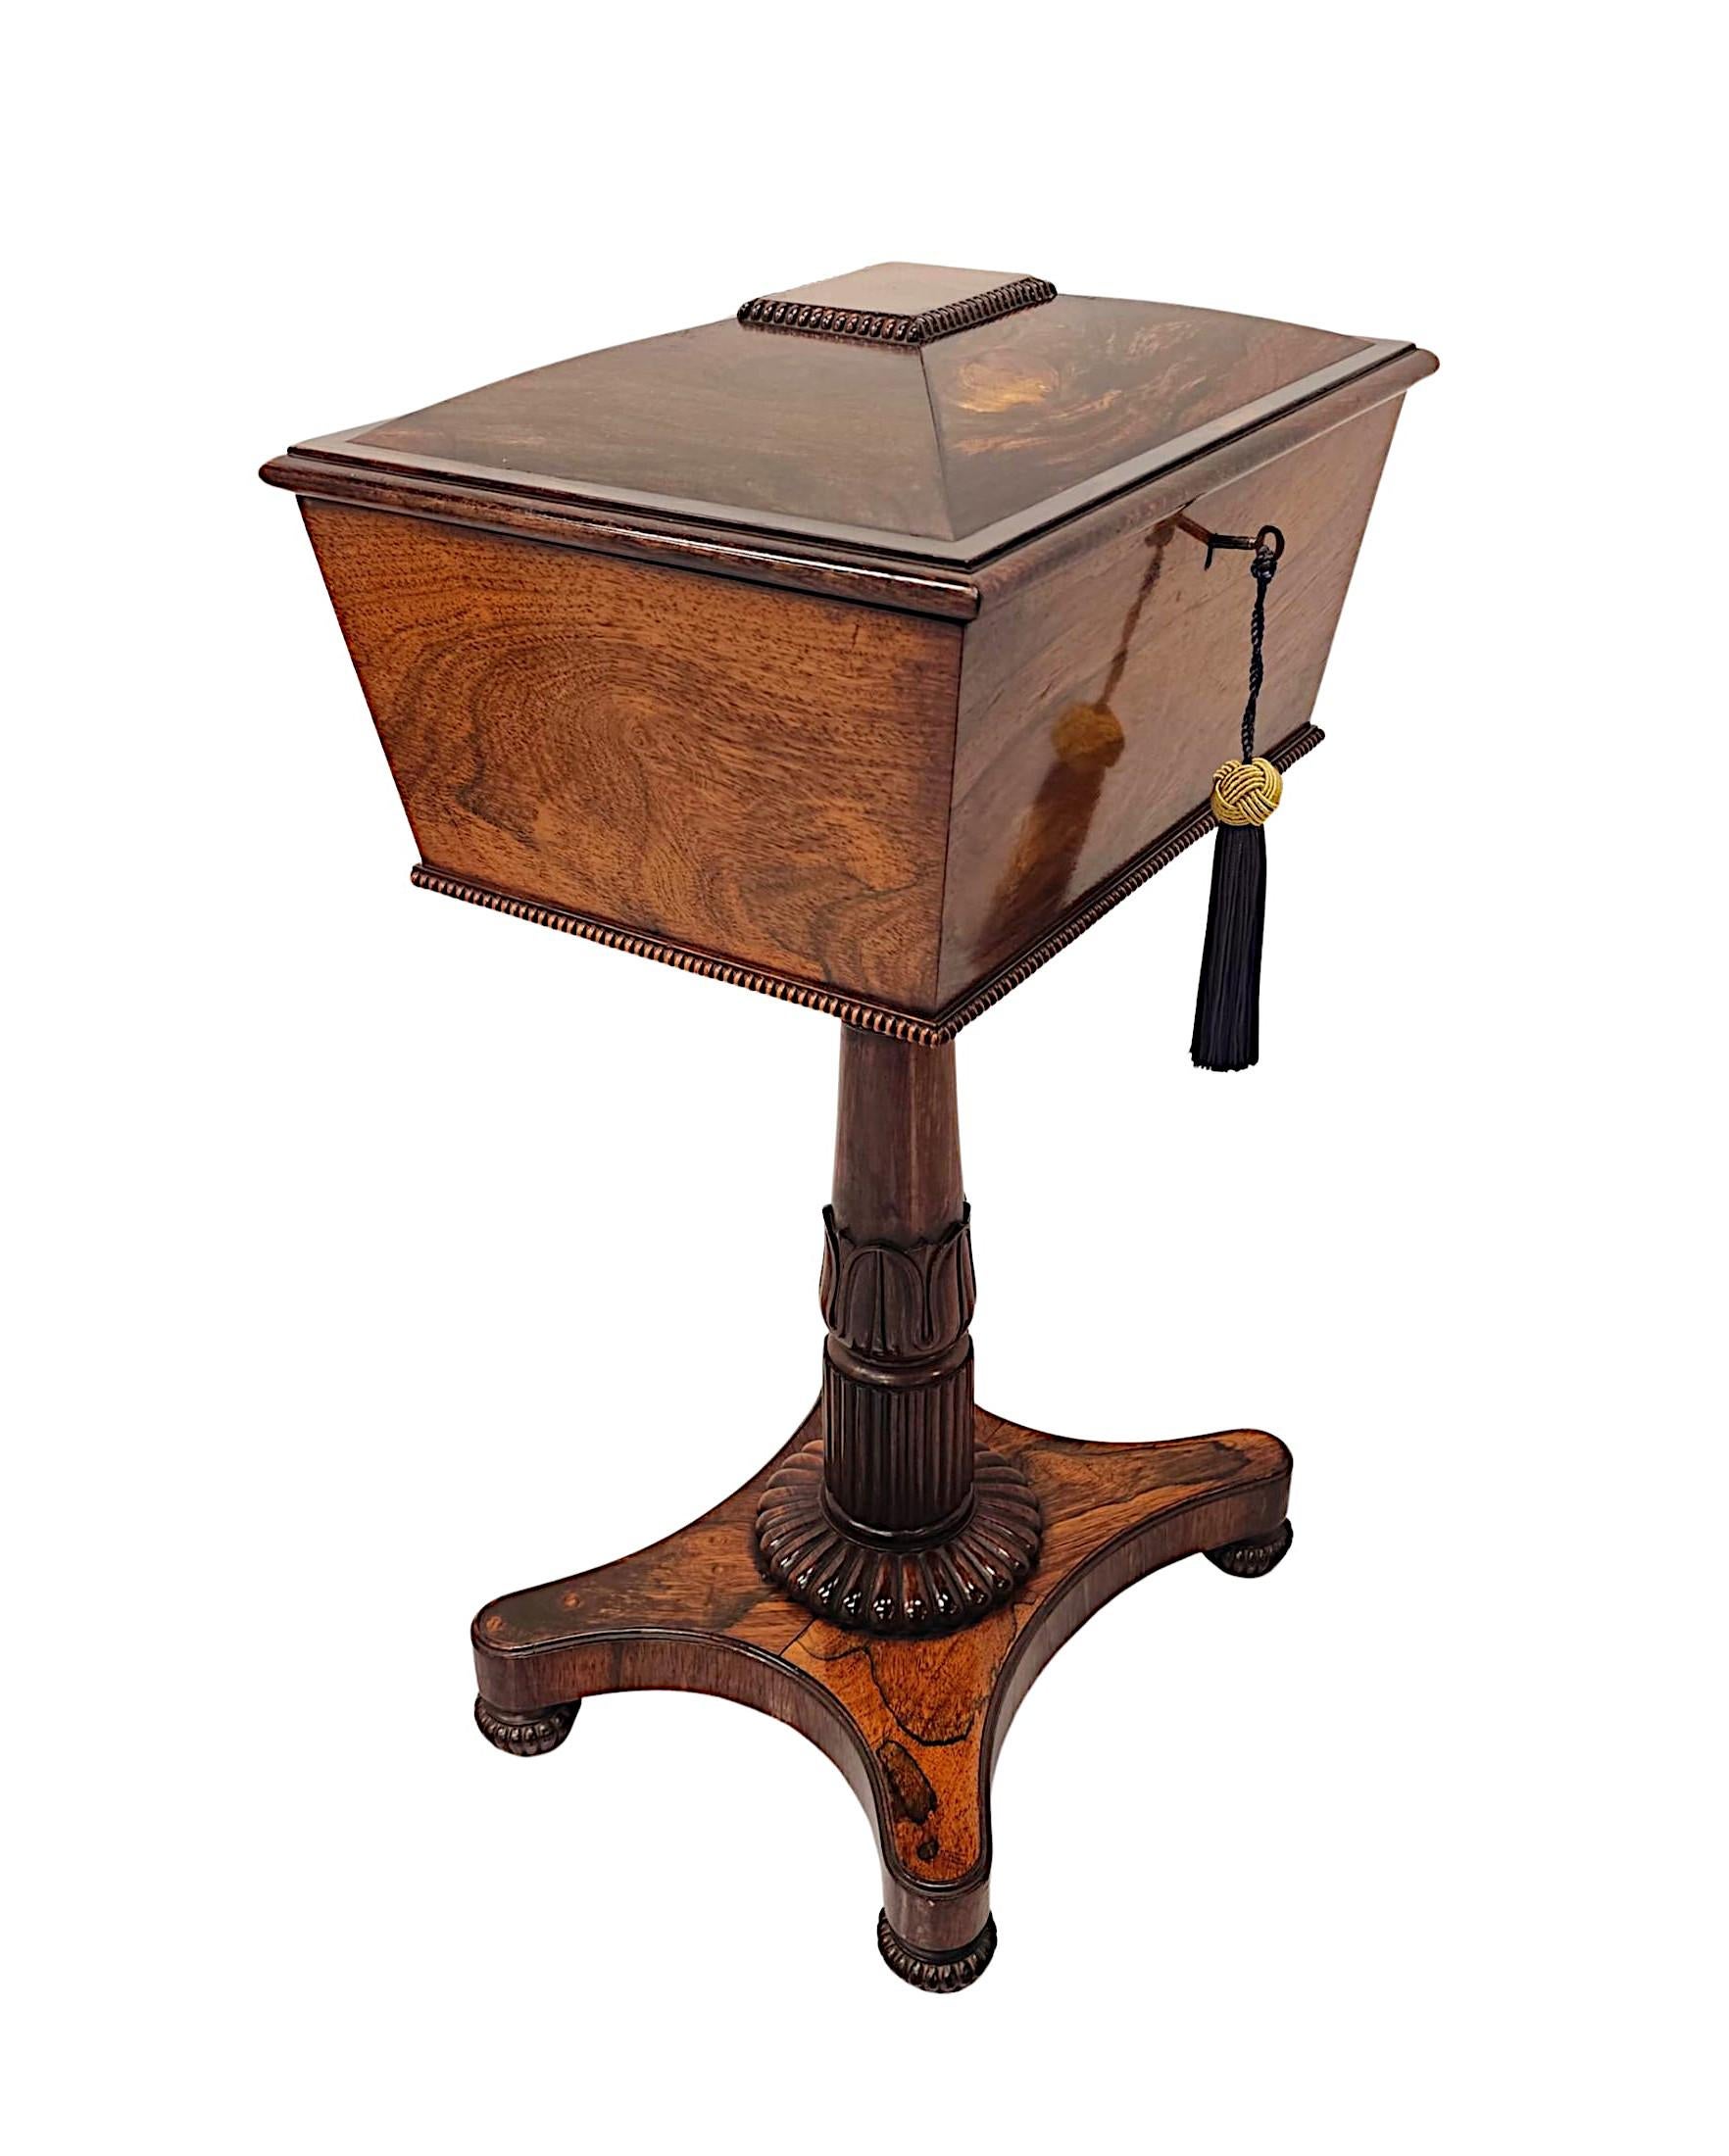 A very rare early 19th Century Regency fruitwood teapoy of exceptional quality, finely hand carved with gorgeously rich patination and fine grain.  The well figured, moulded and quarter veneered hinged top of sarcophagus form with decorative gadroon